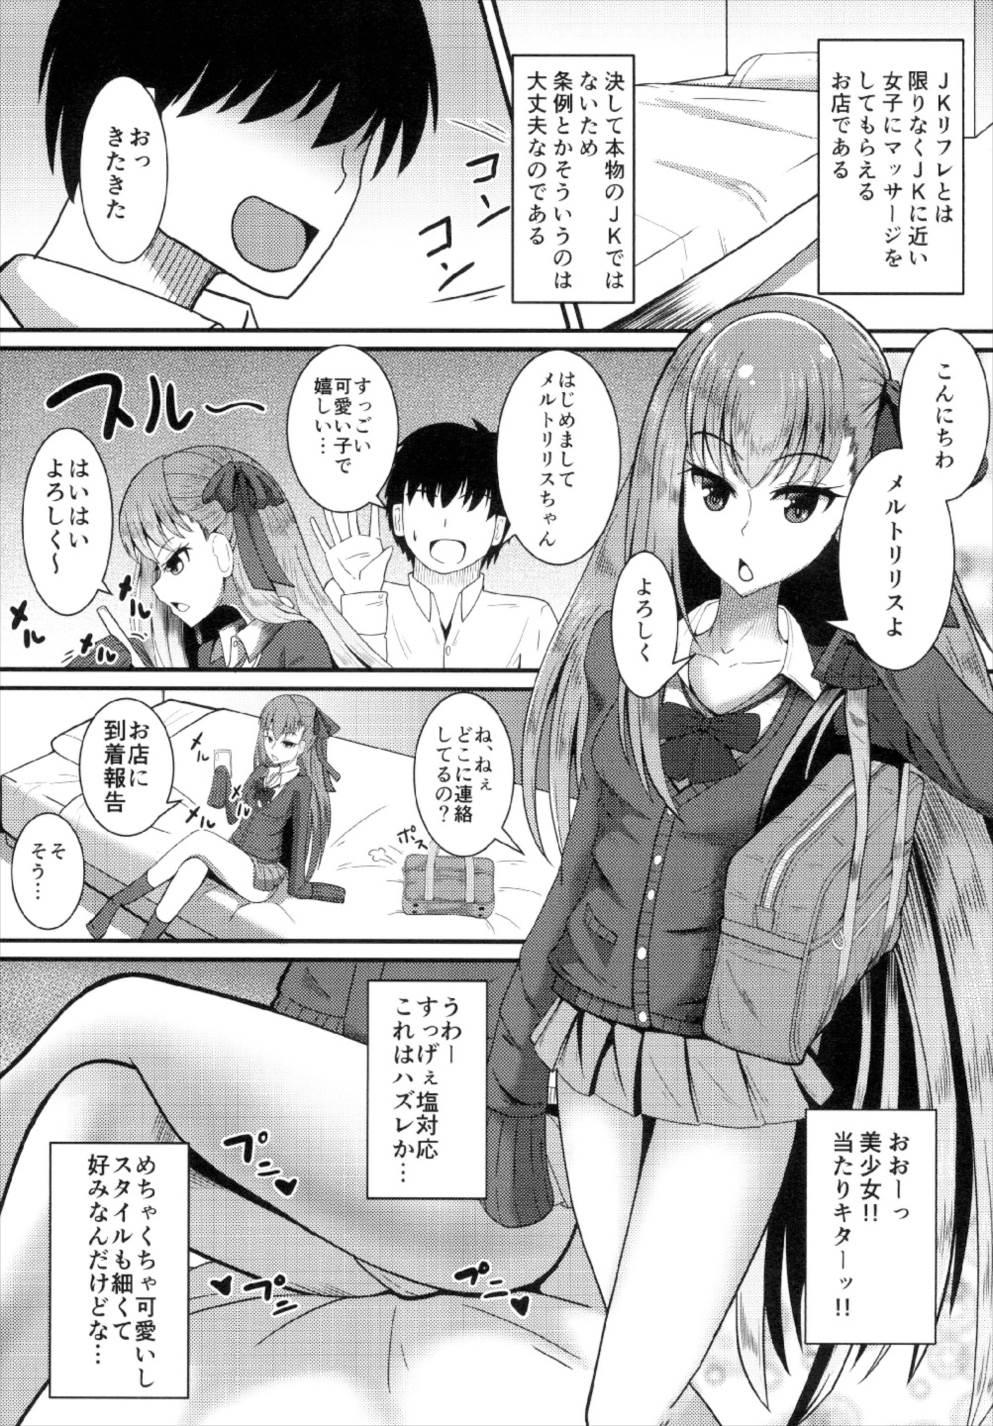 Str8 Chaldea JK Collection Vol. 2 Meltlilith - Fate grand order Roleplay - Page 3